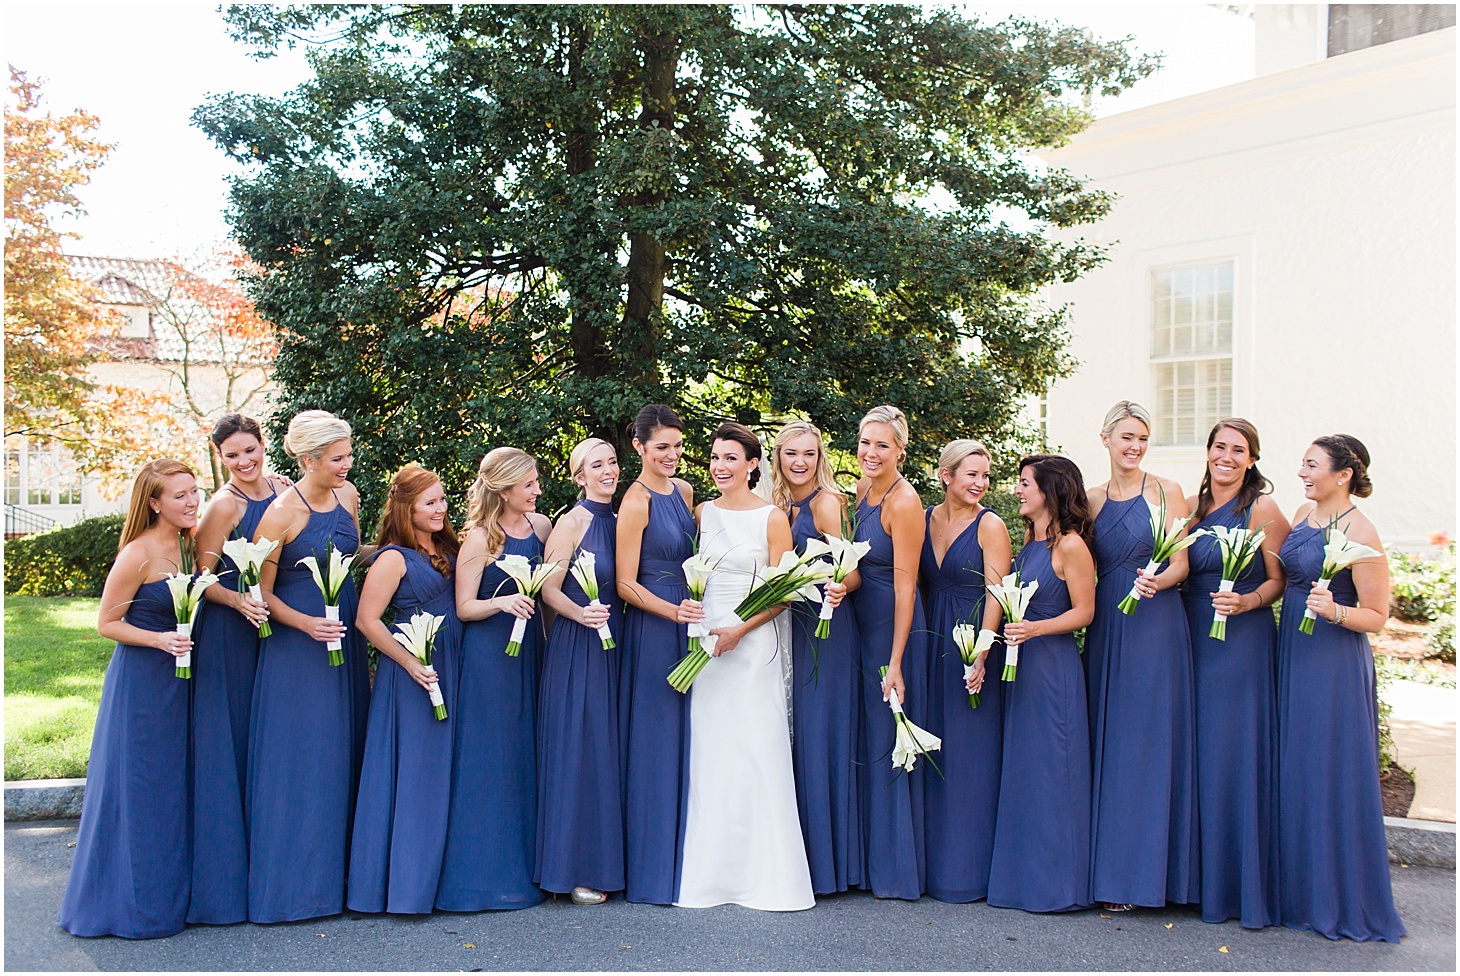 Bride and Bridesmaids Portraits at Columbia Country Club | Wedding Ceremony at Cathedral of St. Matthew the Apostle | Classy October Wedding in Washington, D.C. | Sarah Bradshaw Photography